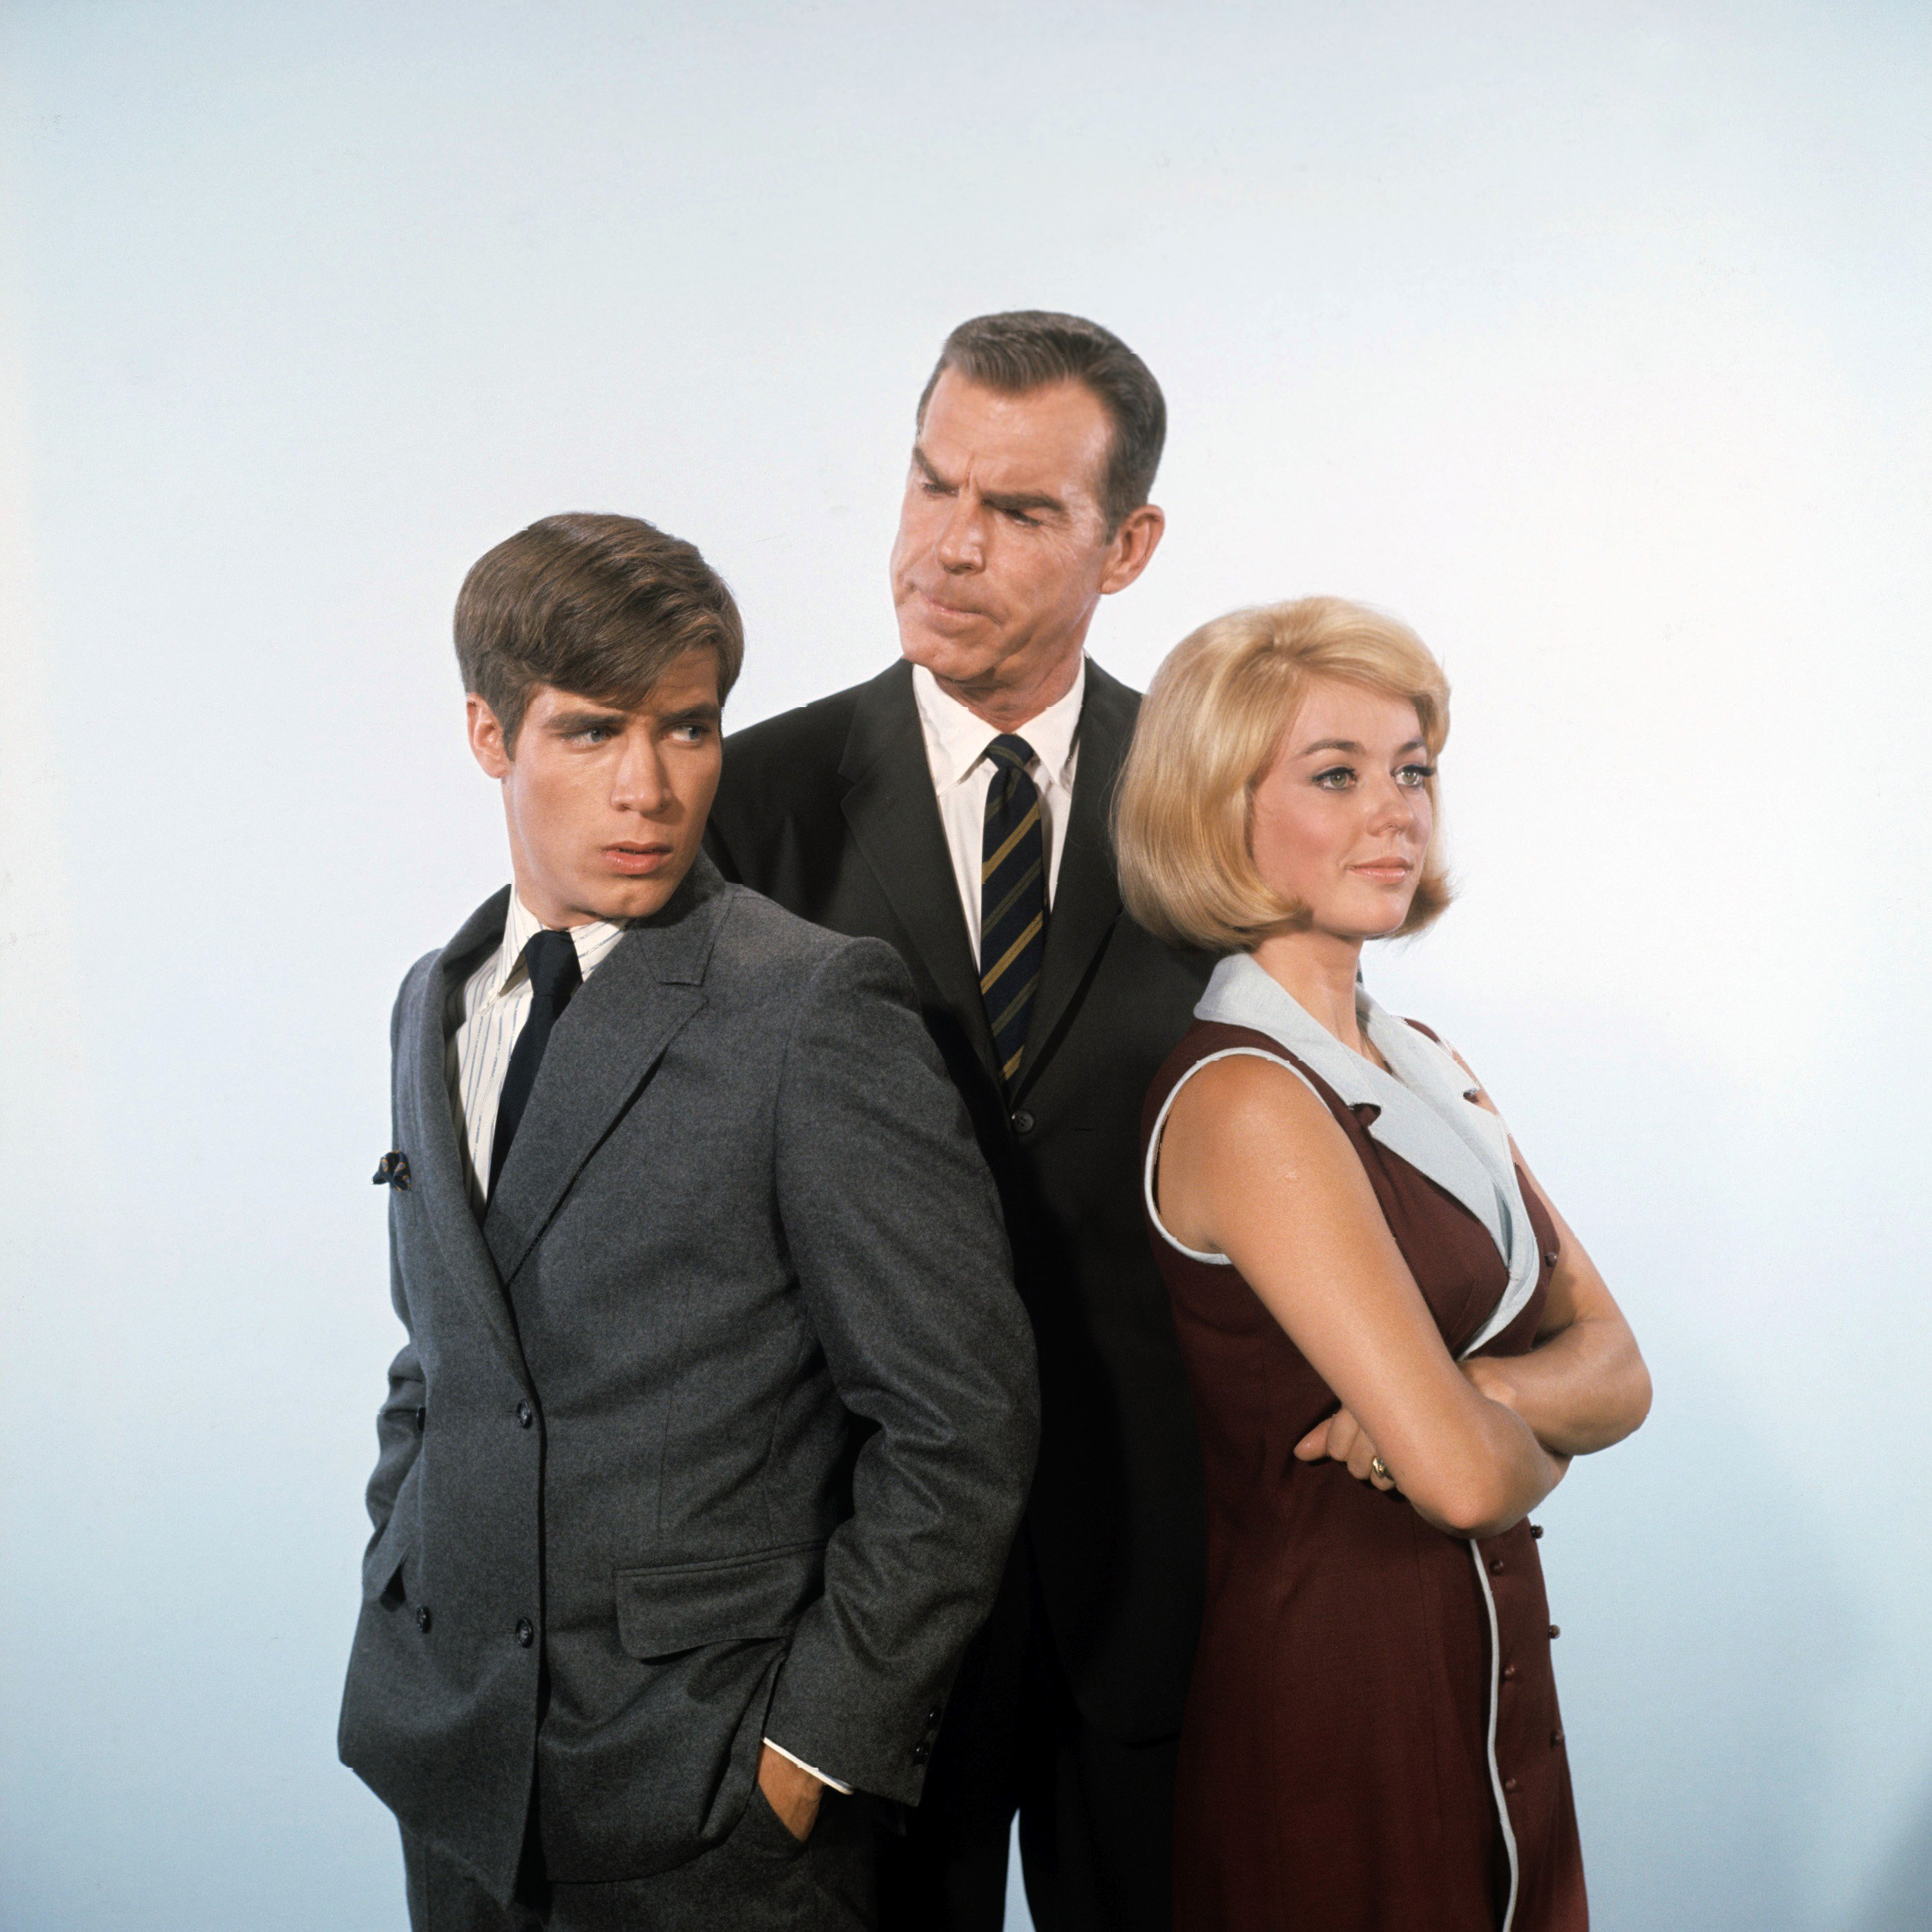 Don Grady, Fred MacMurray, Tina Cole circa 1968 | Source: Getty Images